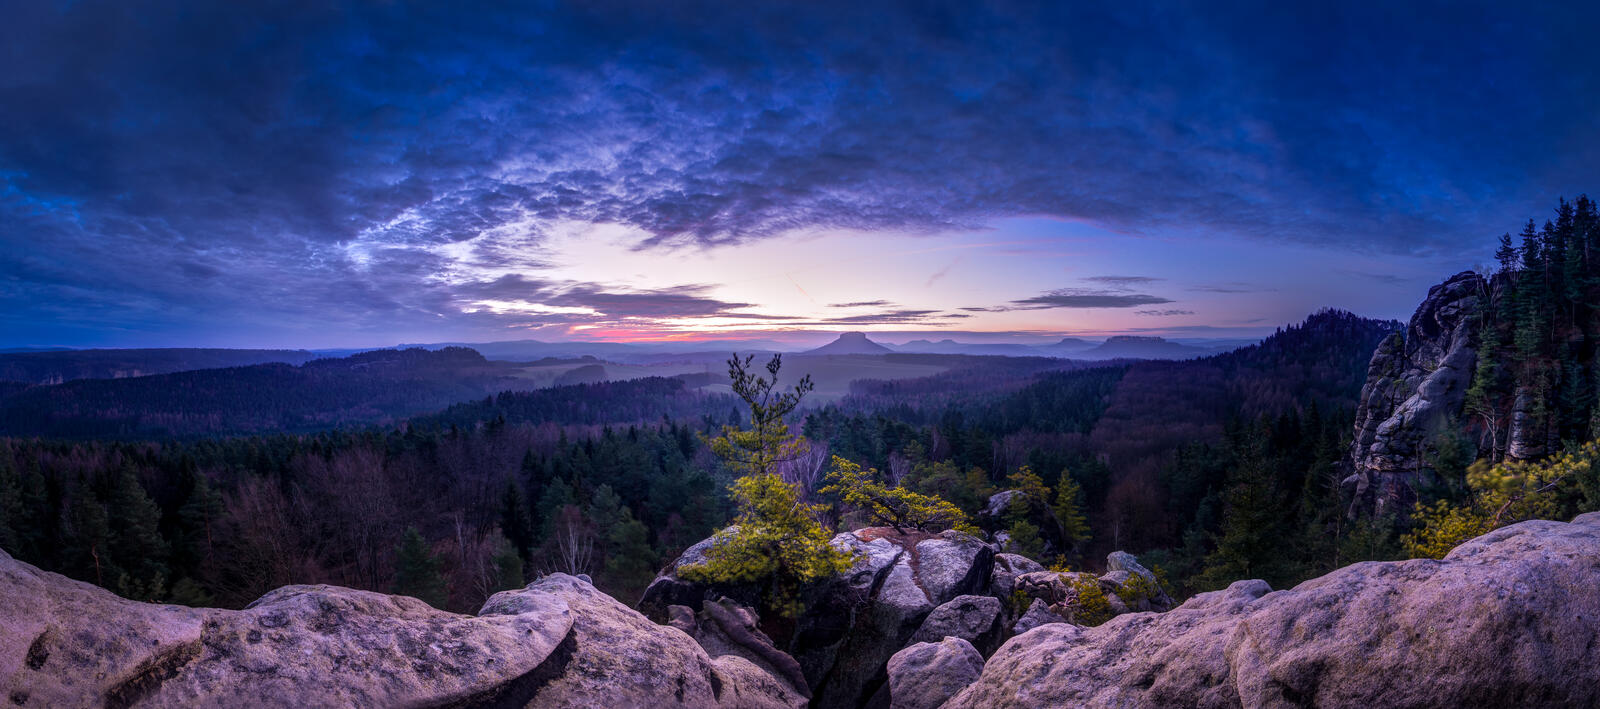 Wallpapers Panorama from the great bear of stone in Saxon Switzerland with views of Lilienstein k nigstein and Rauenstein on the desktop